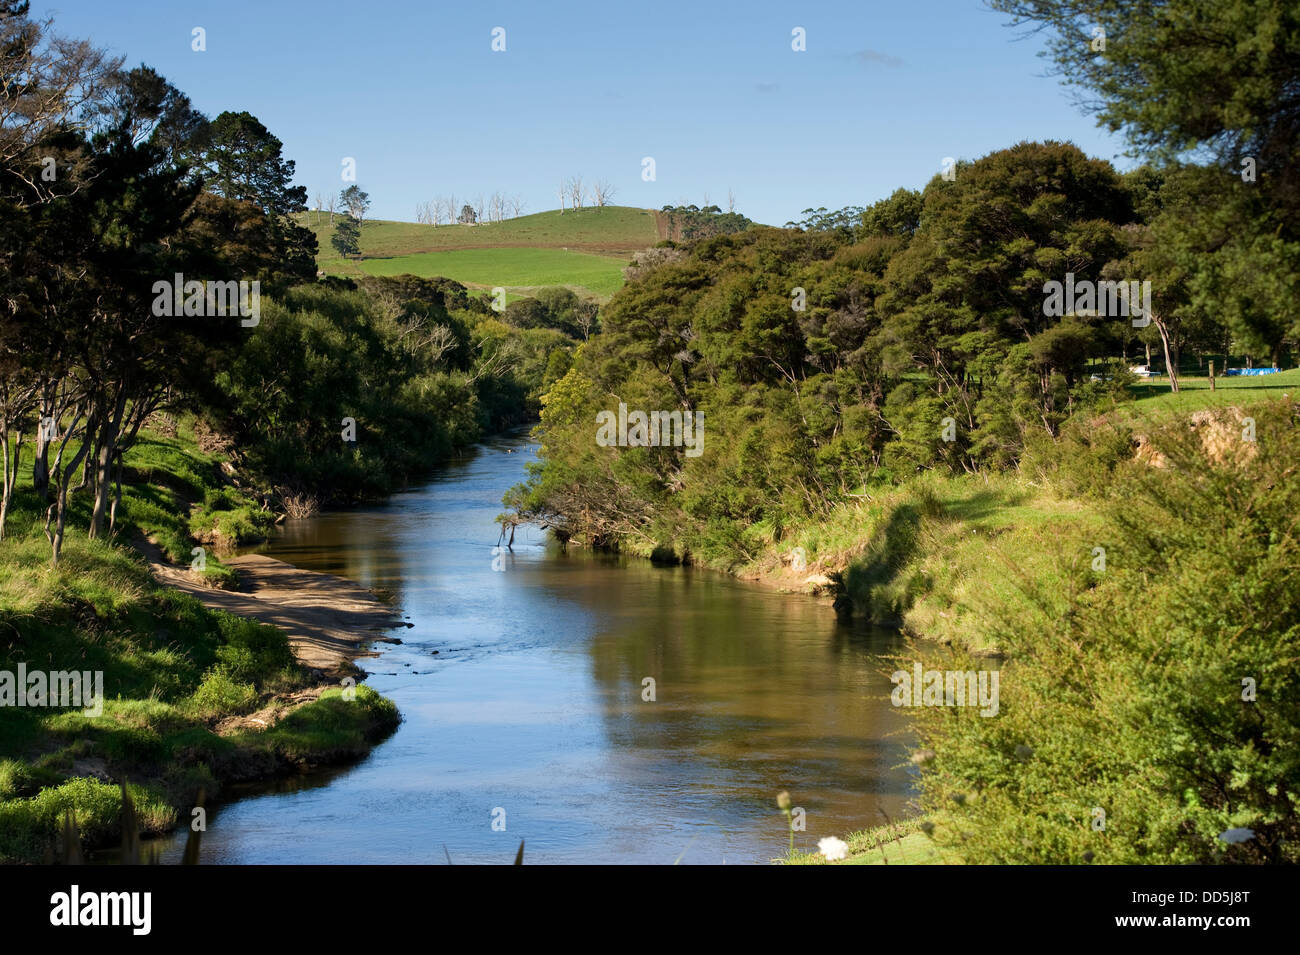 A river running through a rural scene in the vicinity of the Bay of Islands in the North Island of New Zealand Stock Photo